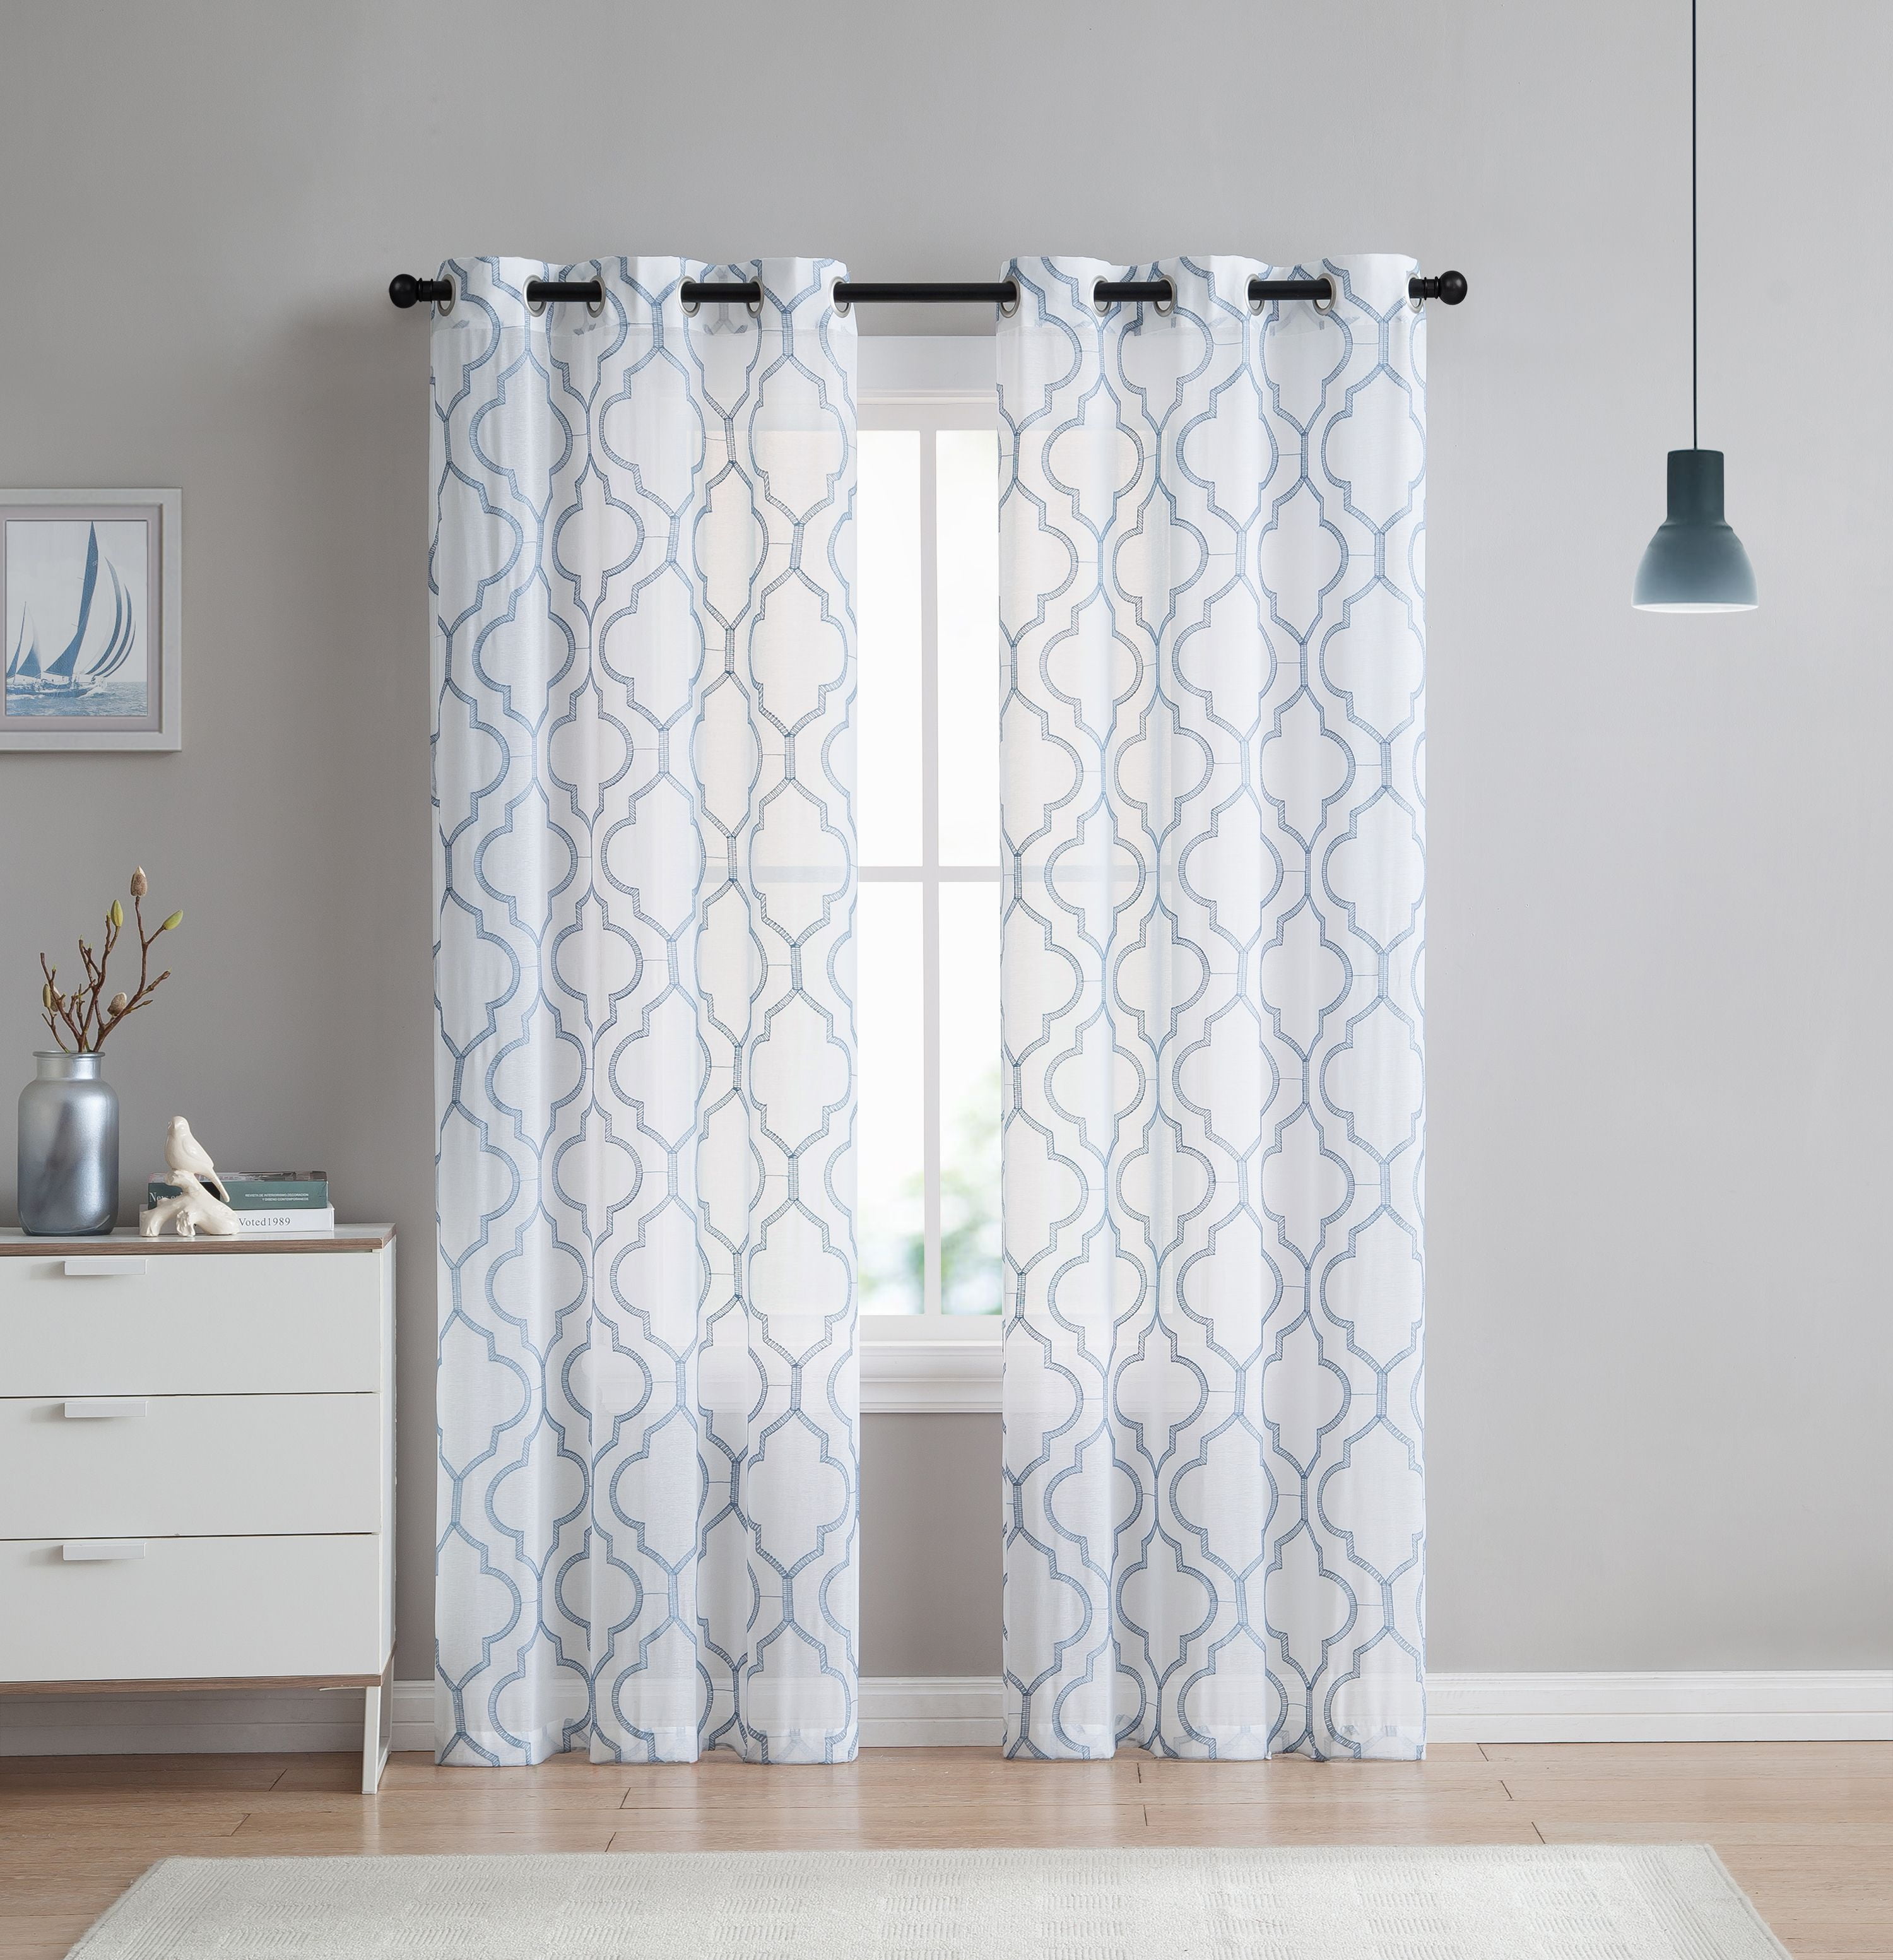 Exclusive Home Curtains EH8039-01 2-96G Rio Burnout Sheer Grommet Top Curtain Panel Pair Winter White 2 Piece 54x96